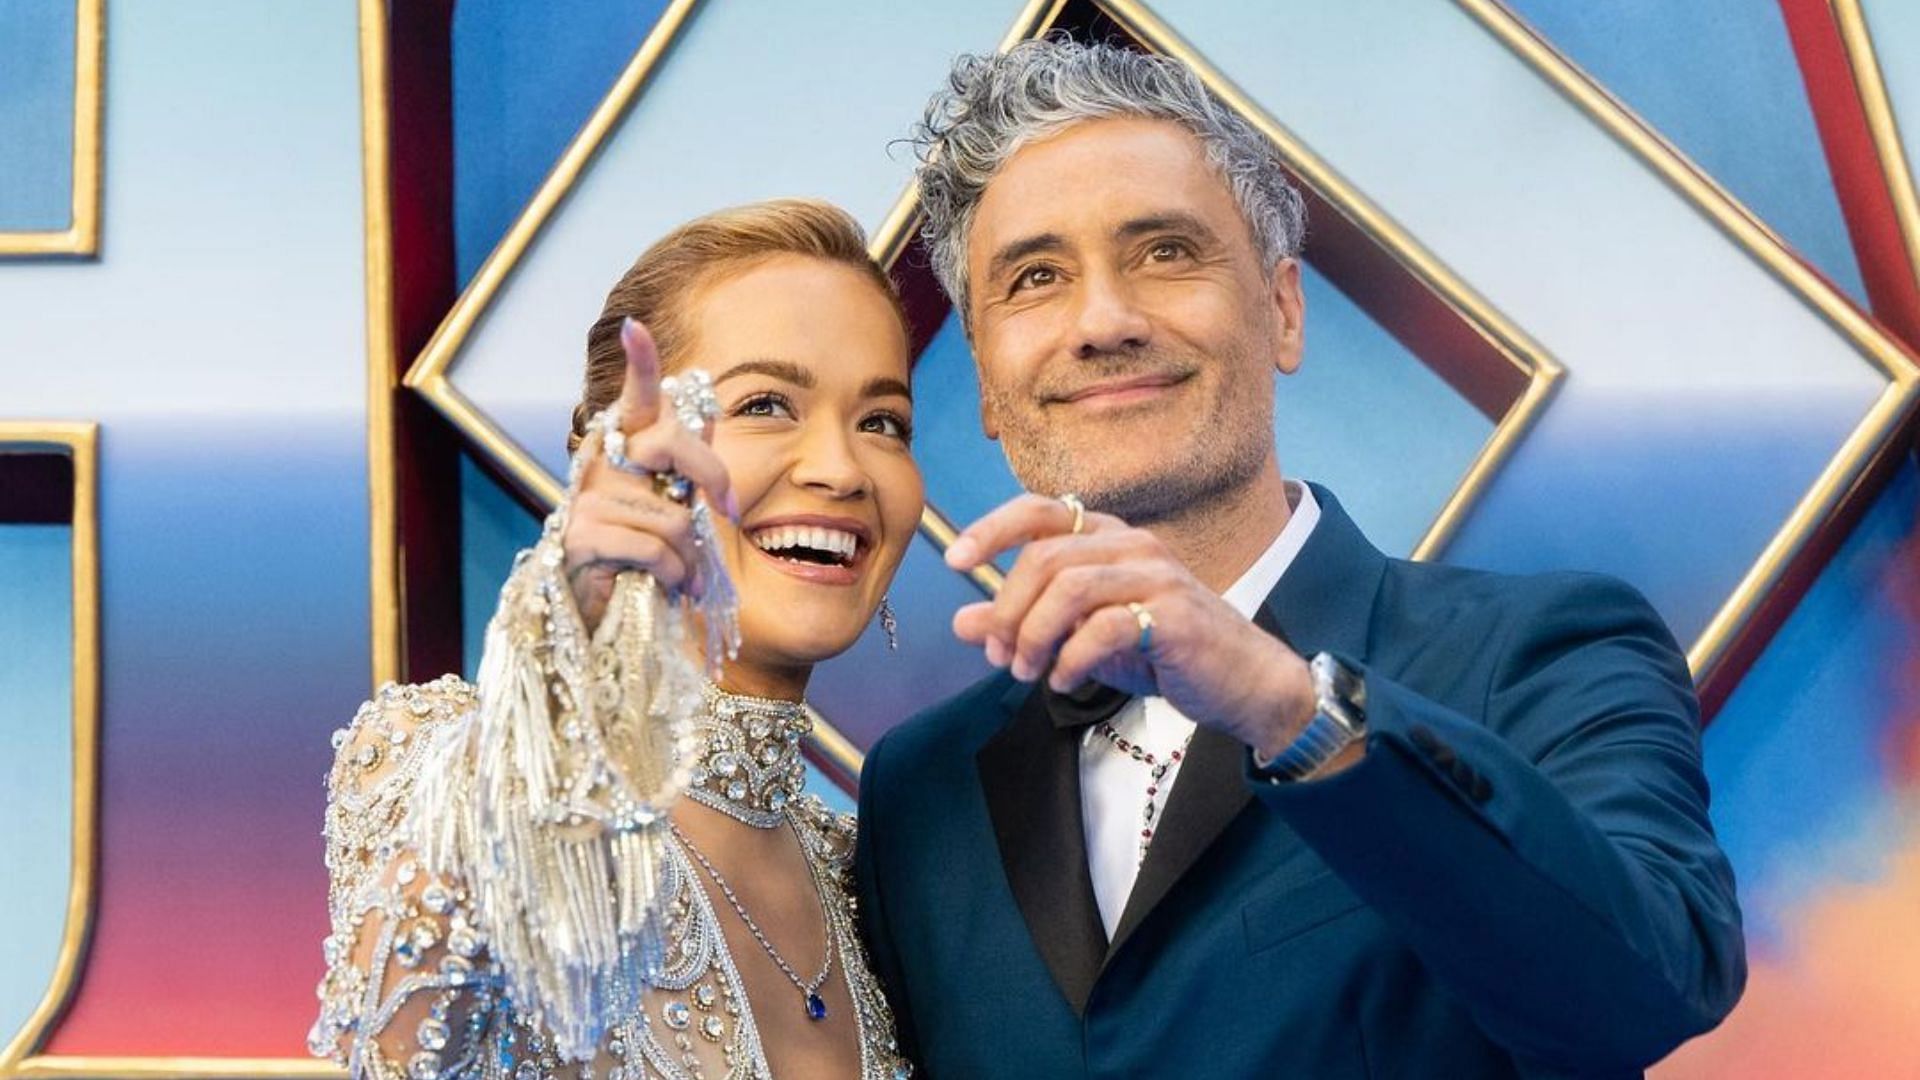 Taika Waititi and Rita Ora reportedly tie the knot. (Image via Getty Images/Samir Hussein)